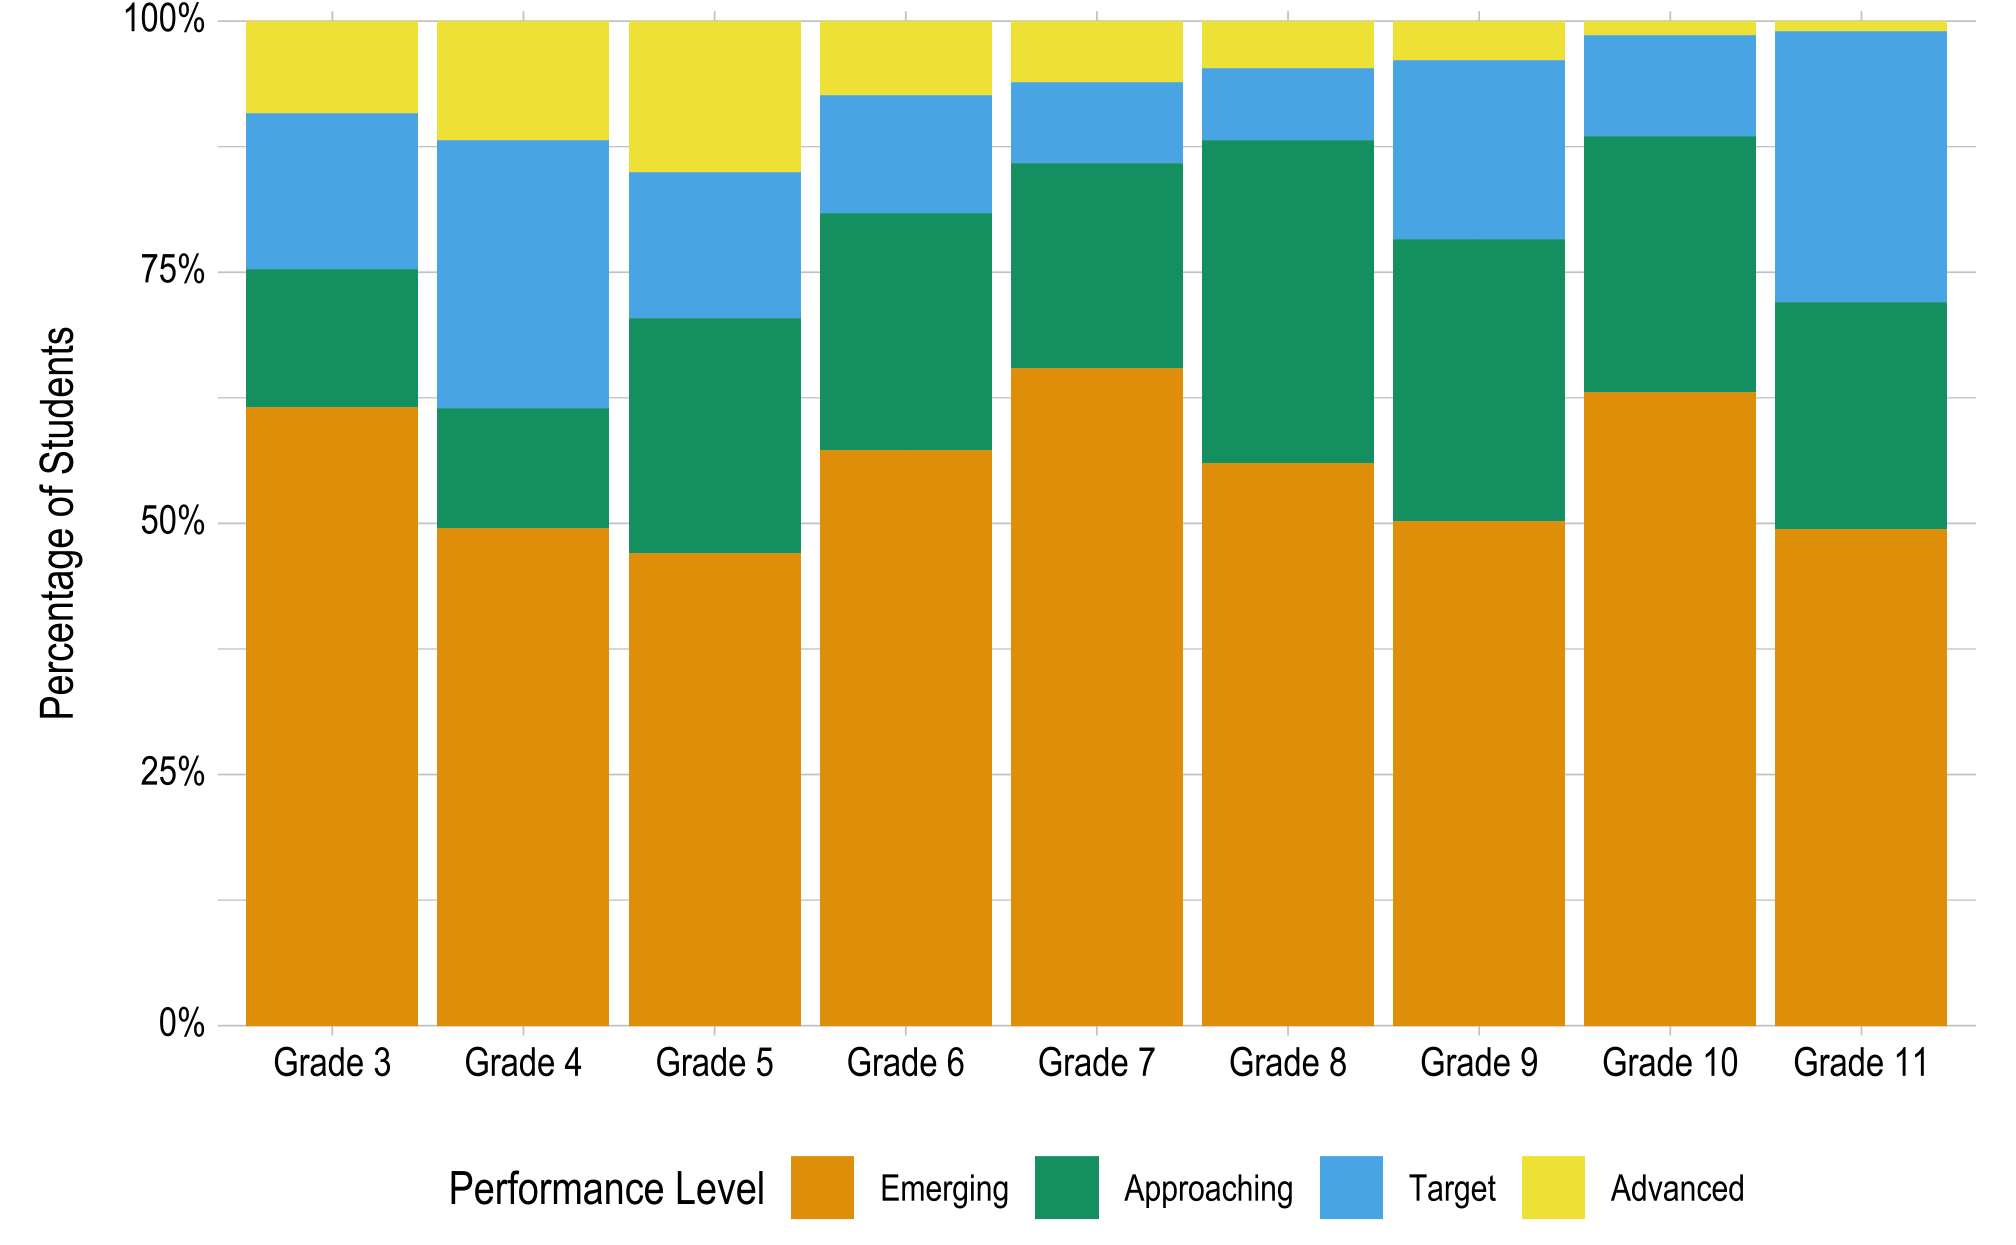 Bar graph, with one column per grade. The bars are all the same height, going to 100%. Each bar is split into four sections showing the percentage of student within each grade that achieved at each performance level in mathematics.